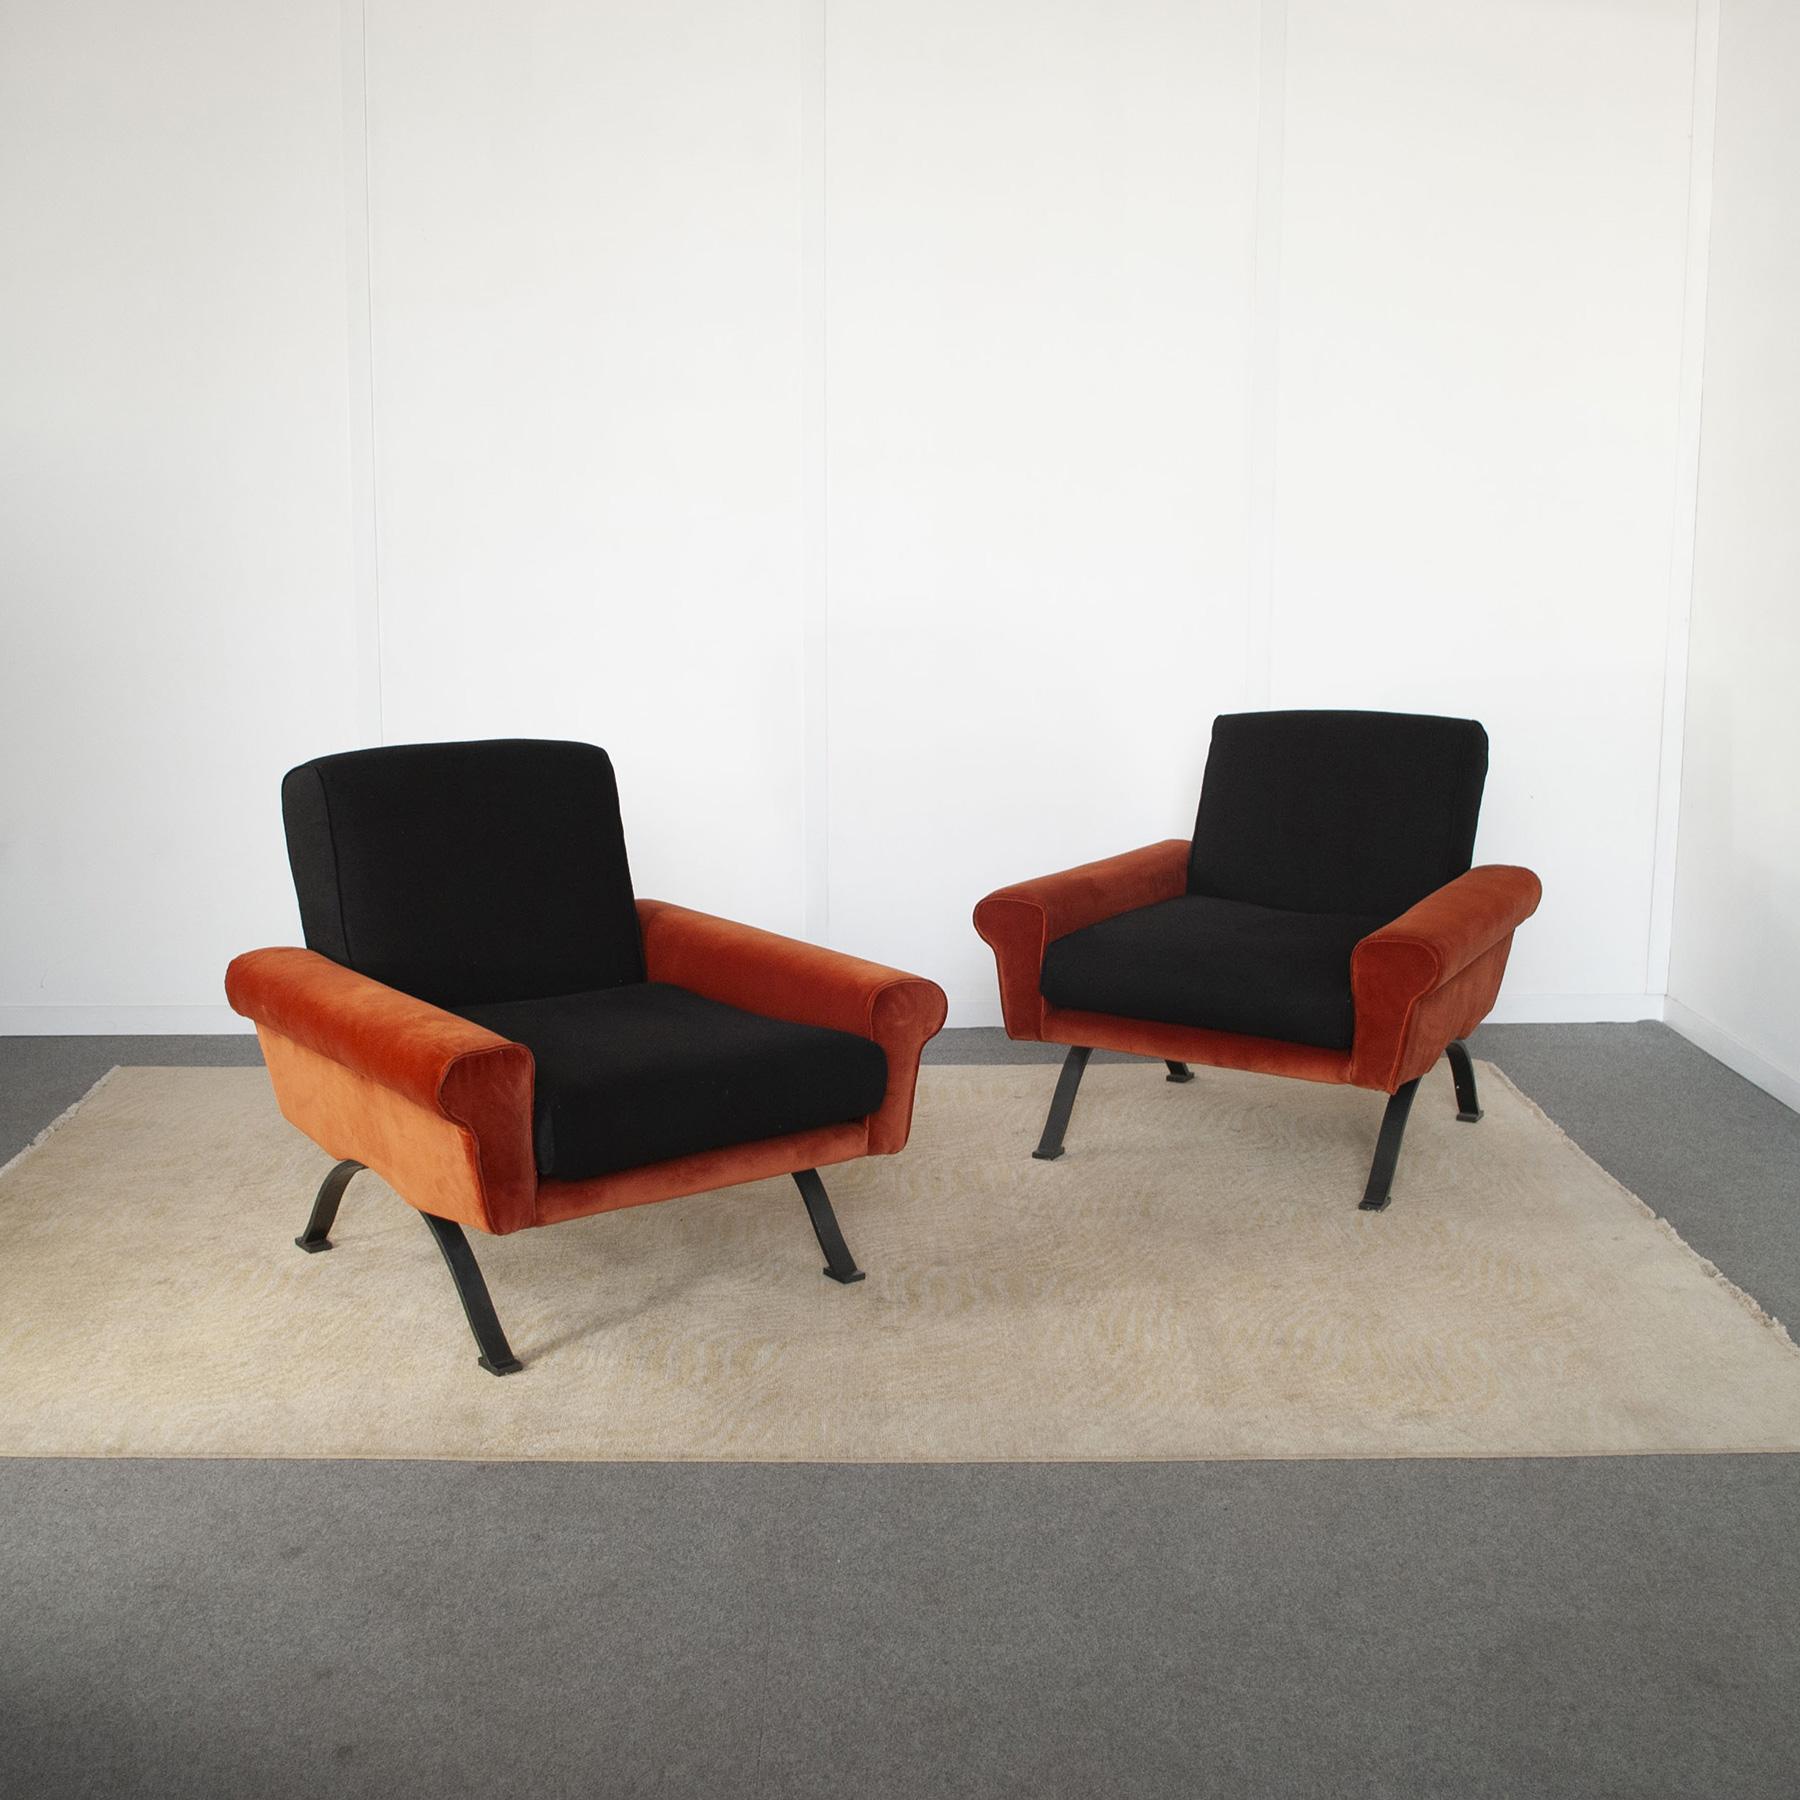 Set of two armchairs of Sergio Saporiti for Fratelli Saporiti Besnate Italy

Since 1950, Saporiti Italia produces some of the most sophisticated and advanced pieces of furniture of the history of Italian design.

There is a leit motiv in all the